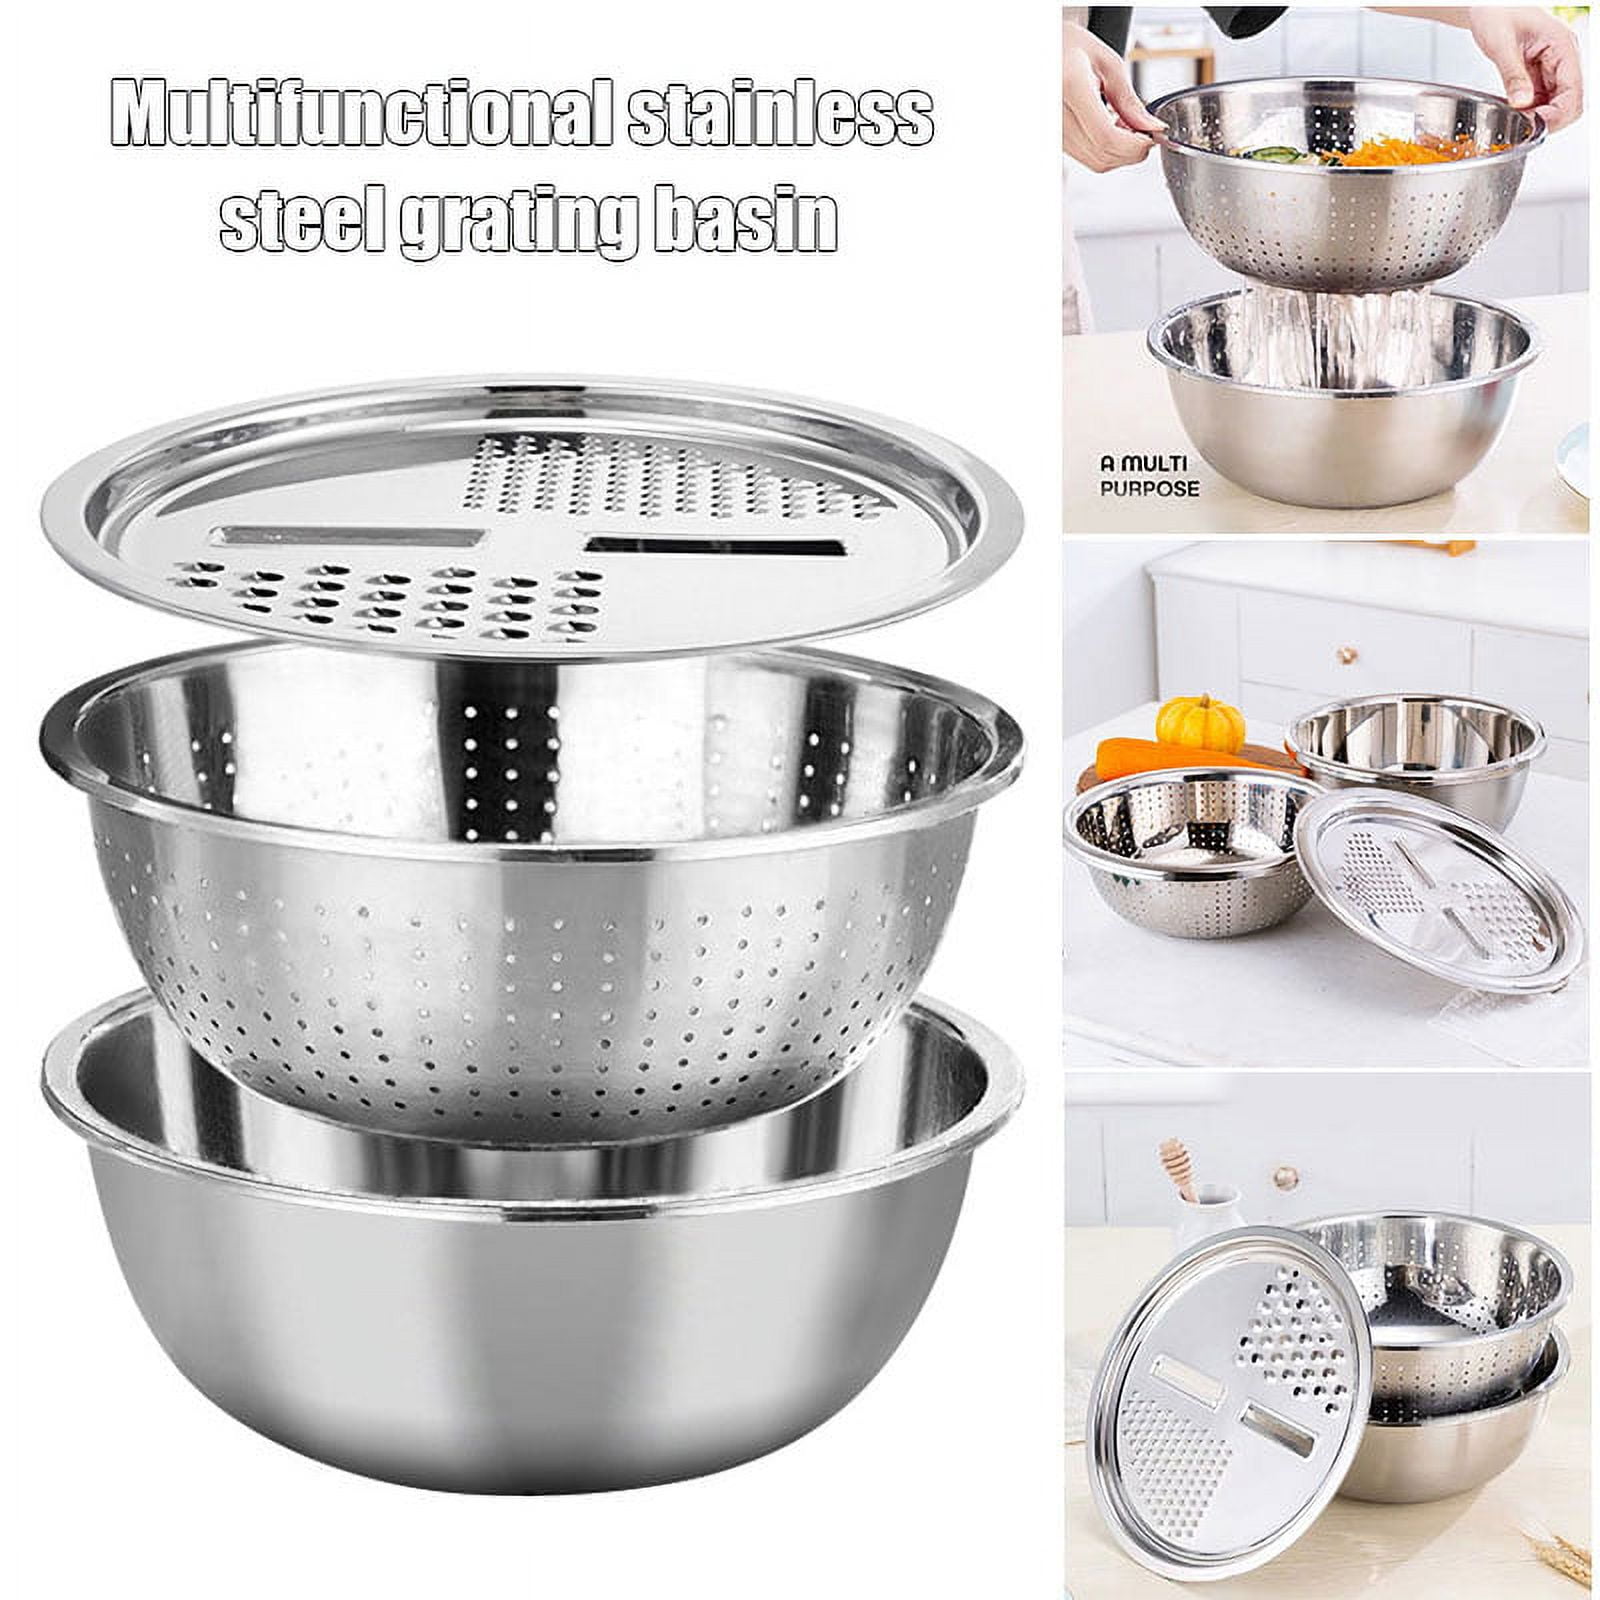 Multifunctional Vegetable Cutter,Stainless Steel Drain Basket, Kitchen Tool  Veggie Cheese Shredder Grater Set with 7 Dicing Blades Salad Maker Bowl